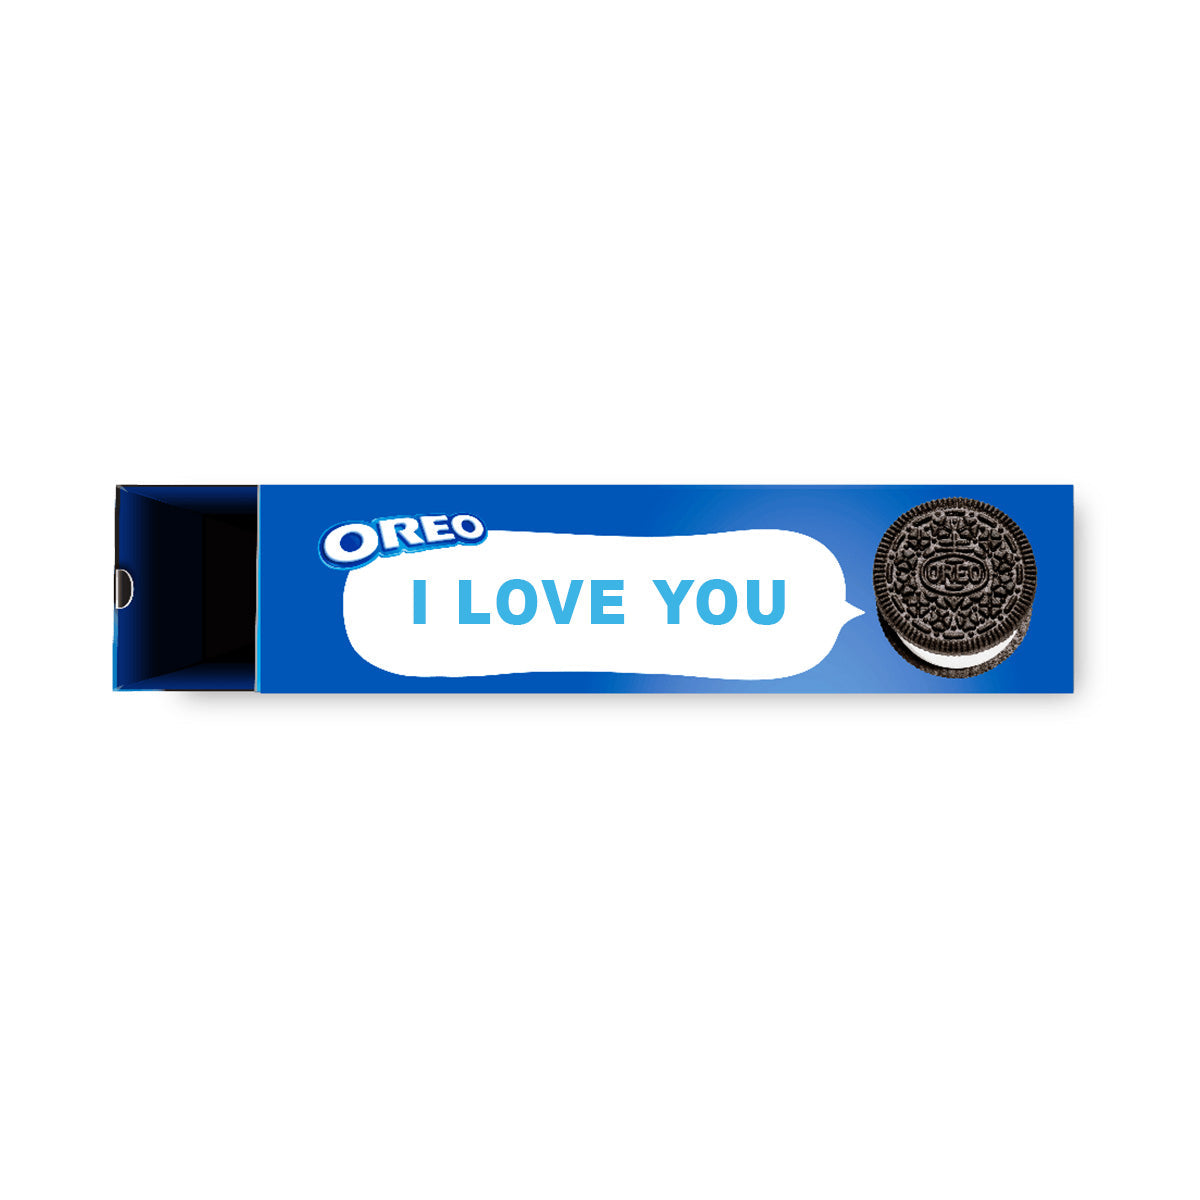 Personalised Box of Oreo's - I love you